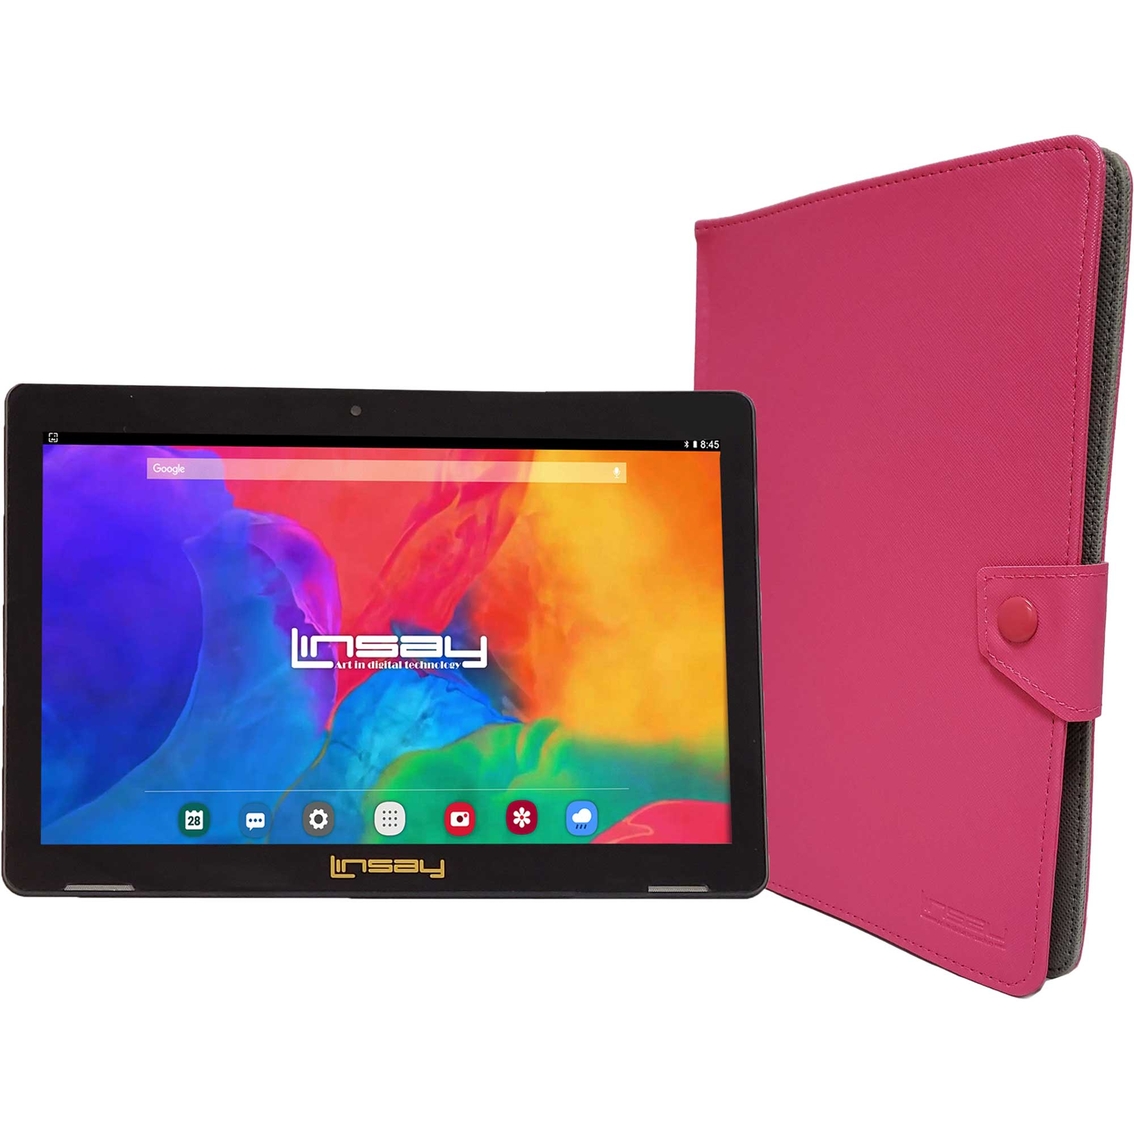 Linsay 10.1 in. IPS 2GB RAM 32GB Tablet with Case, Holder and Pen - Image 2 of 3